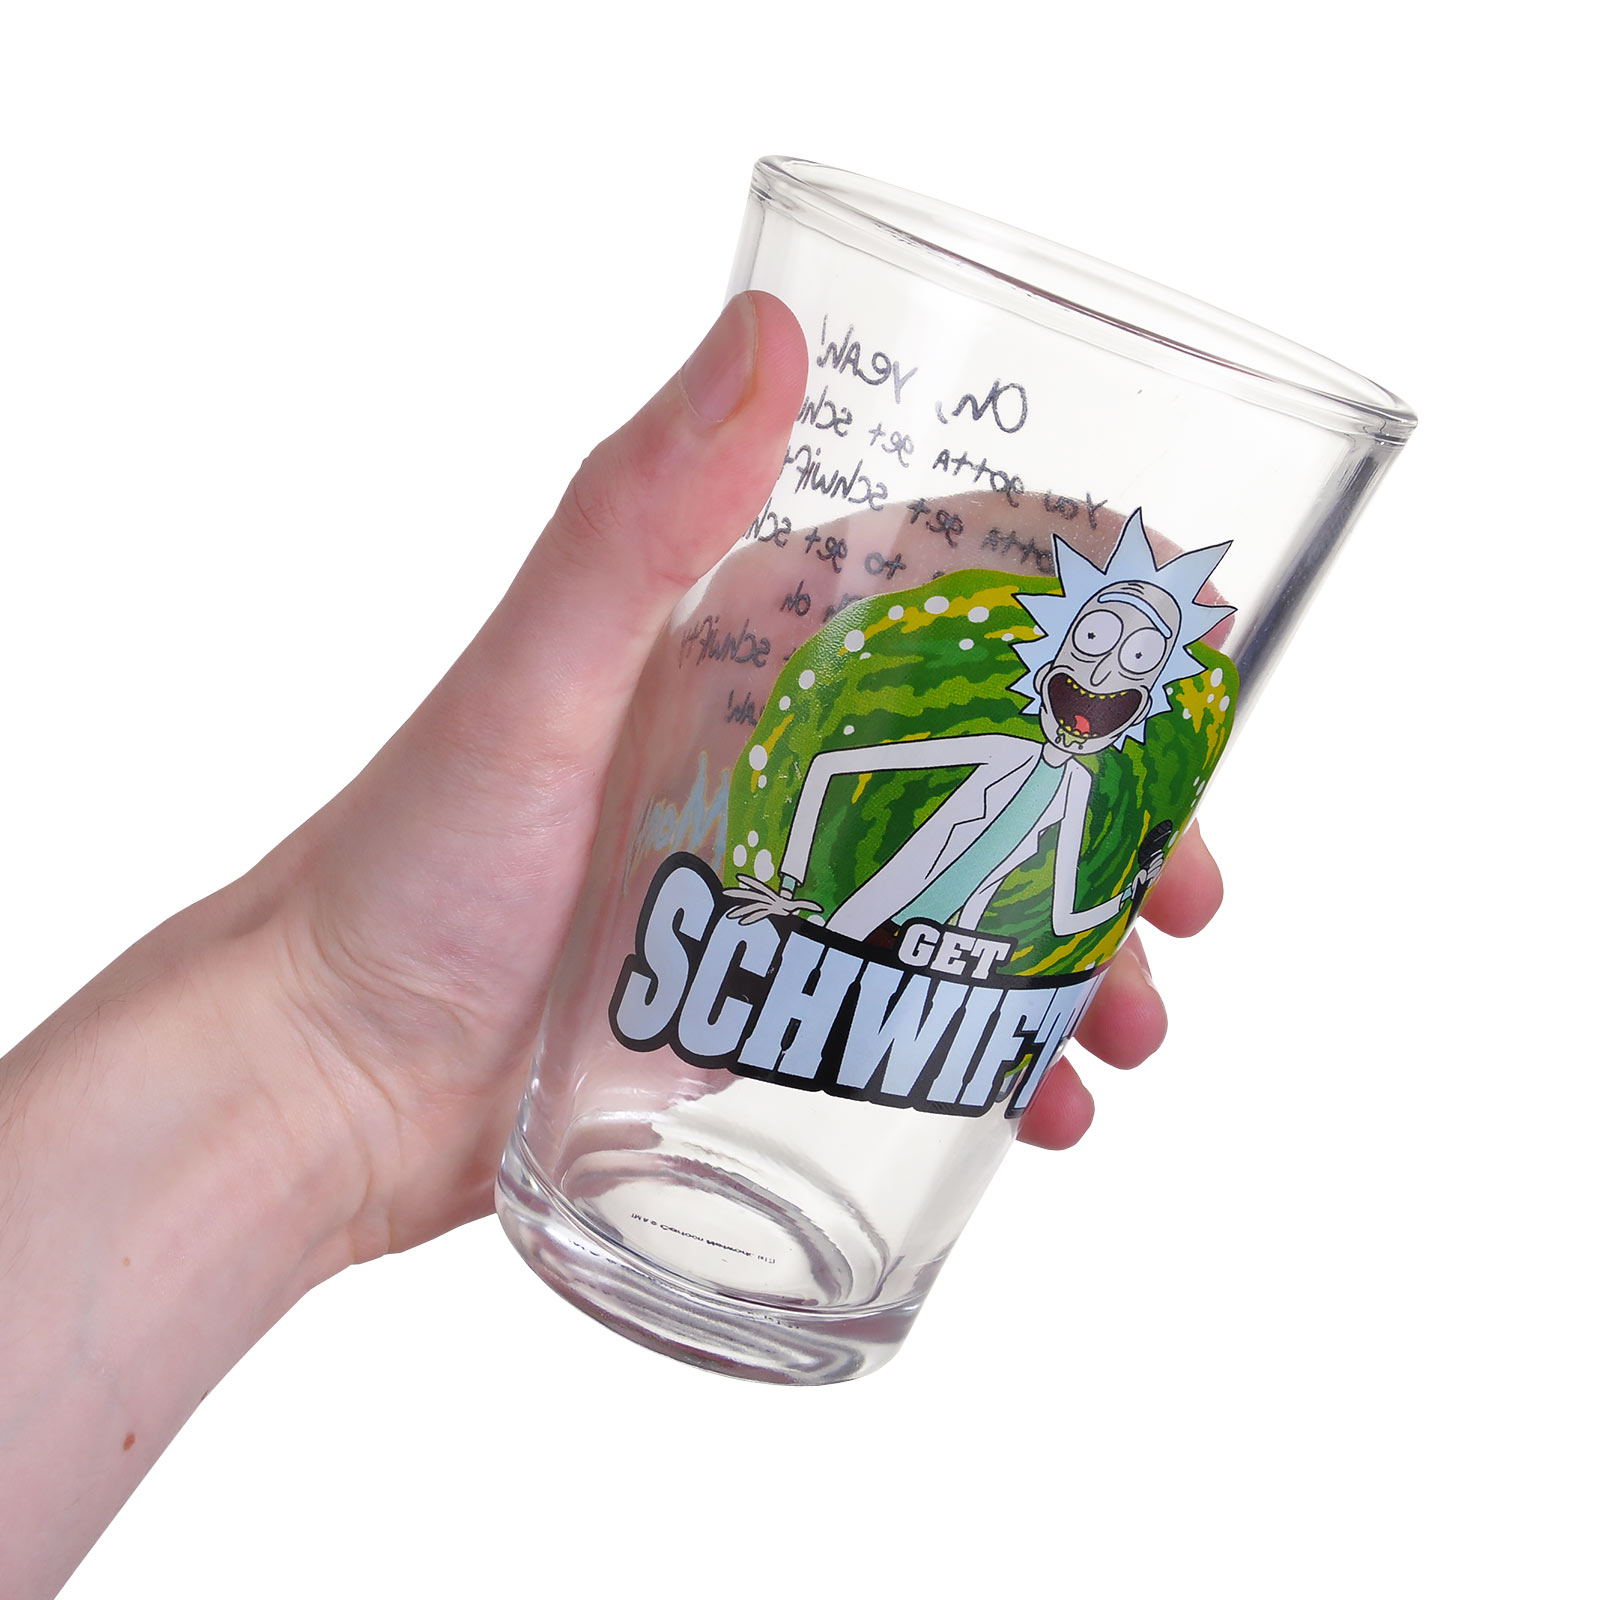 Rick and Morty - Get Schwifty Glass